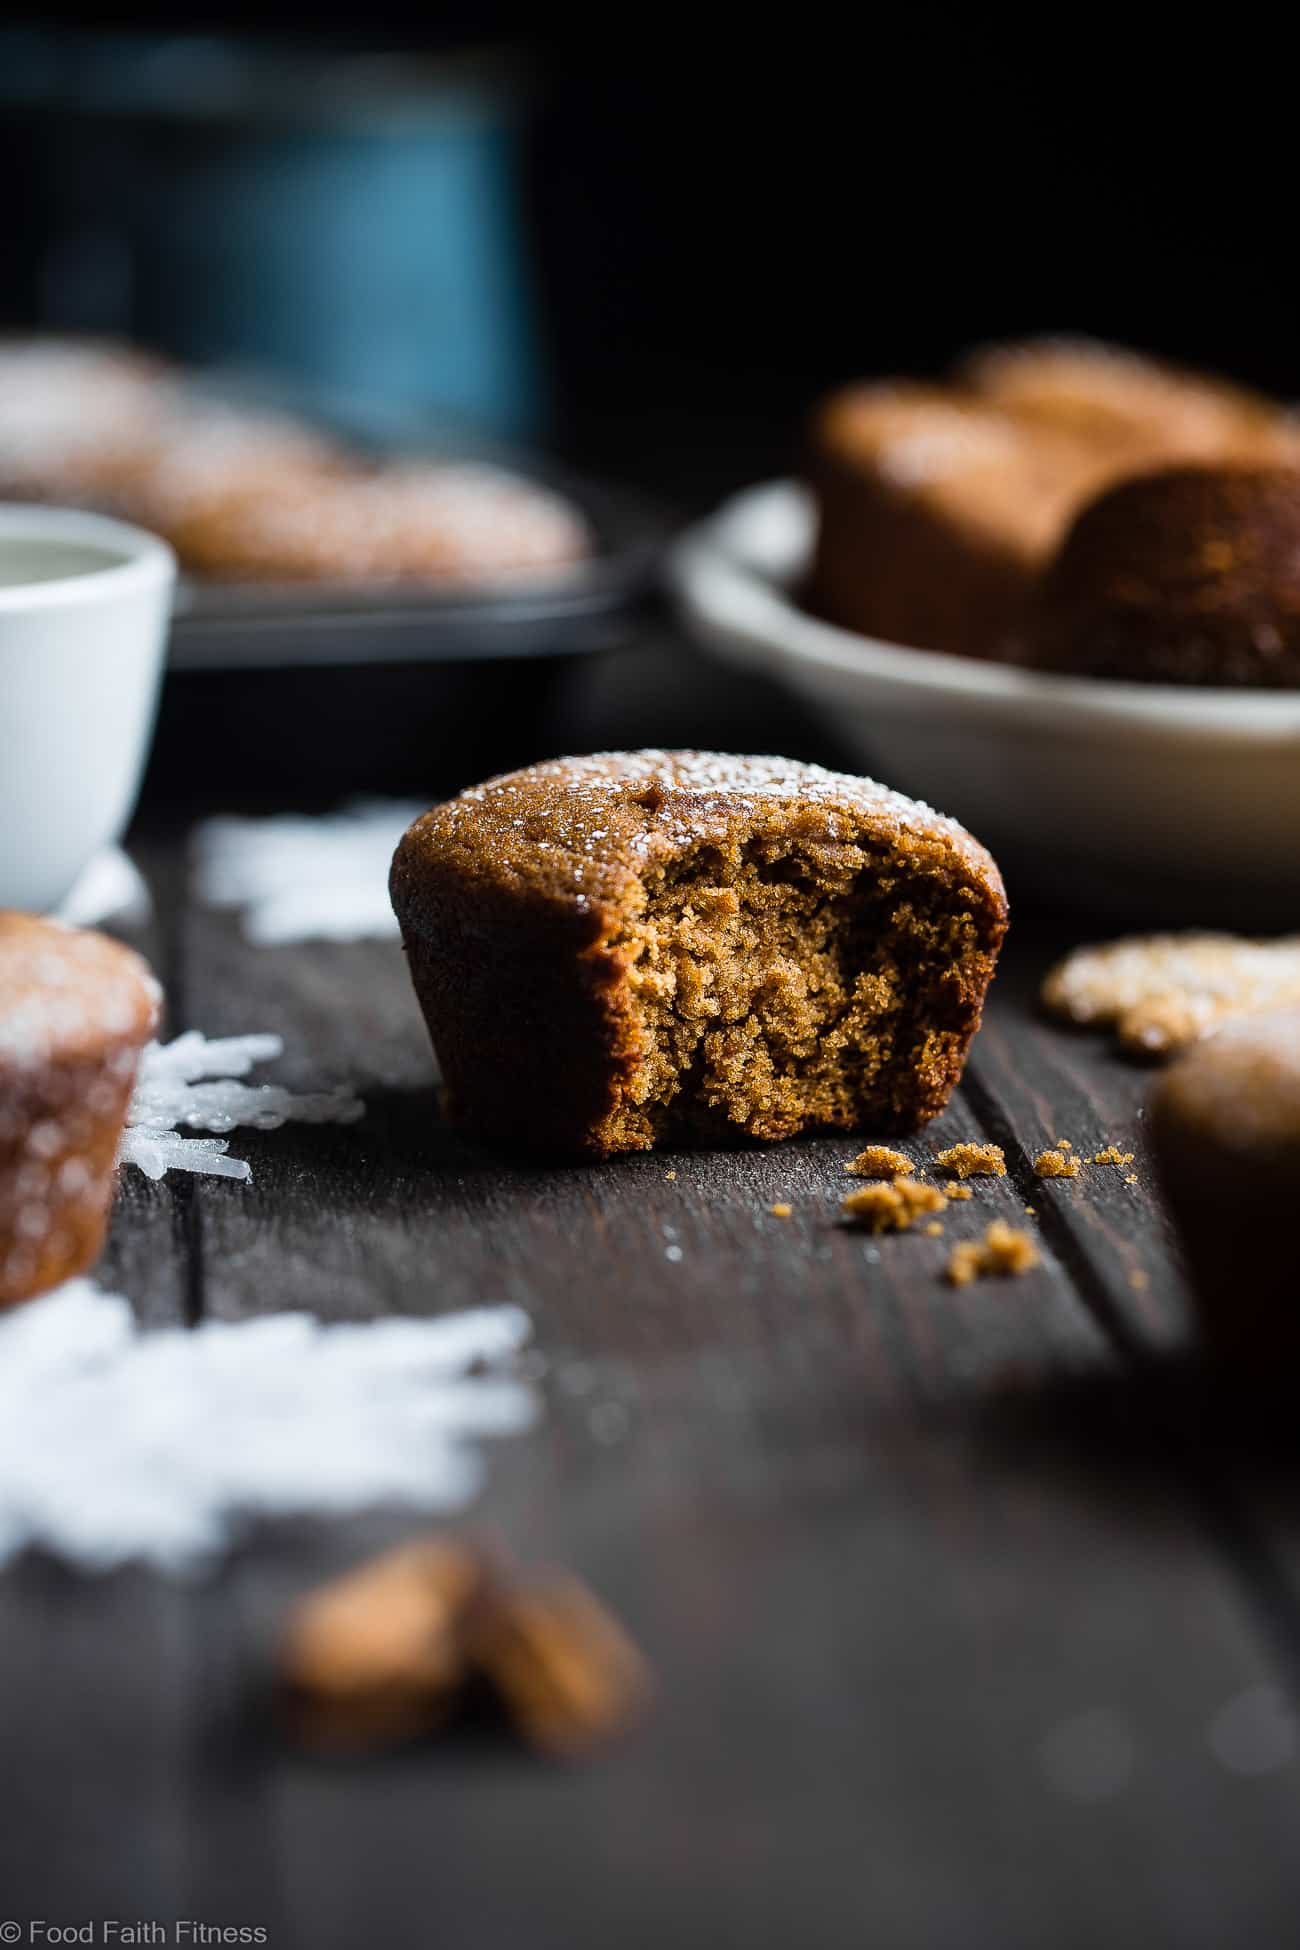  The BEST Healthy Gingerbread Muffin Recipe - This truly is the best healthy gingerbread muffin recipe! Dairy and egg free, vegan friendly and only 5 ingredients and perfect for Christmas morning! | Foodfaithfitness.com | @FoodFaithFit